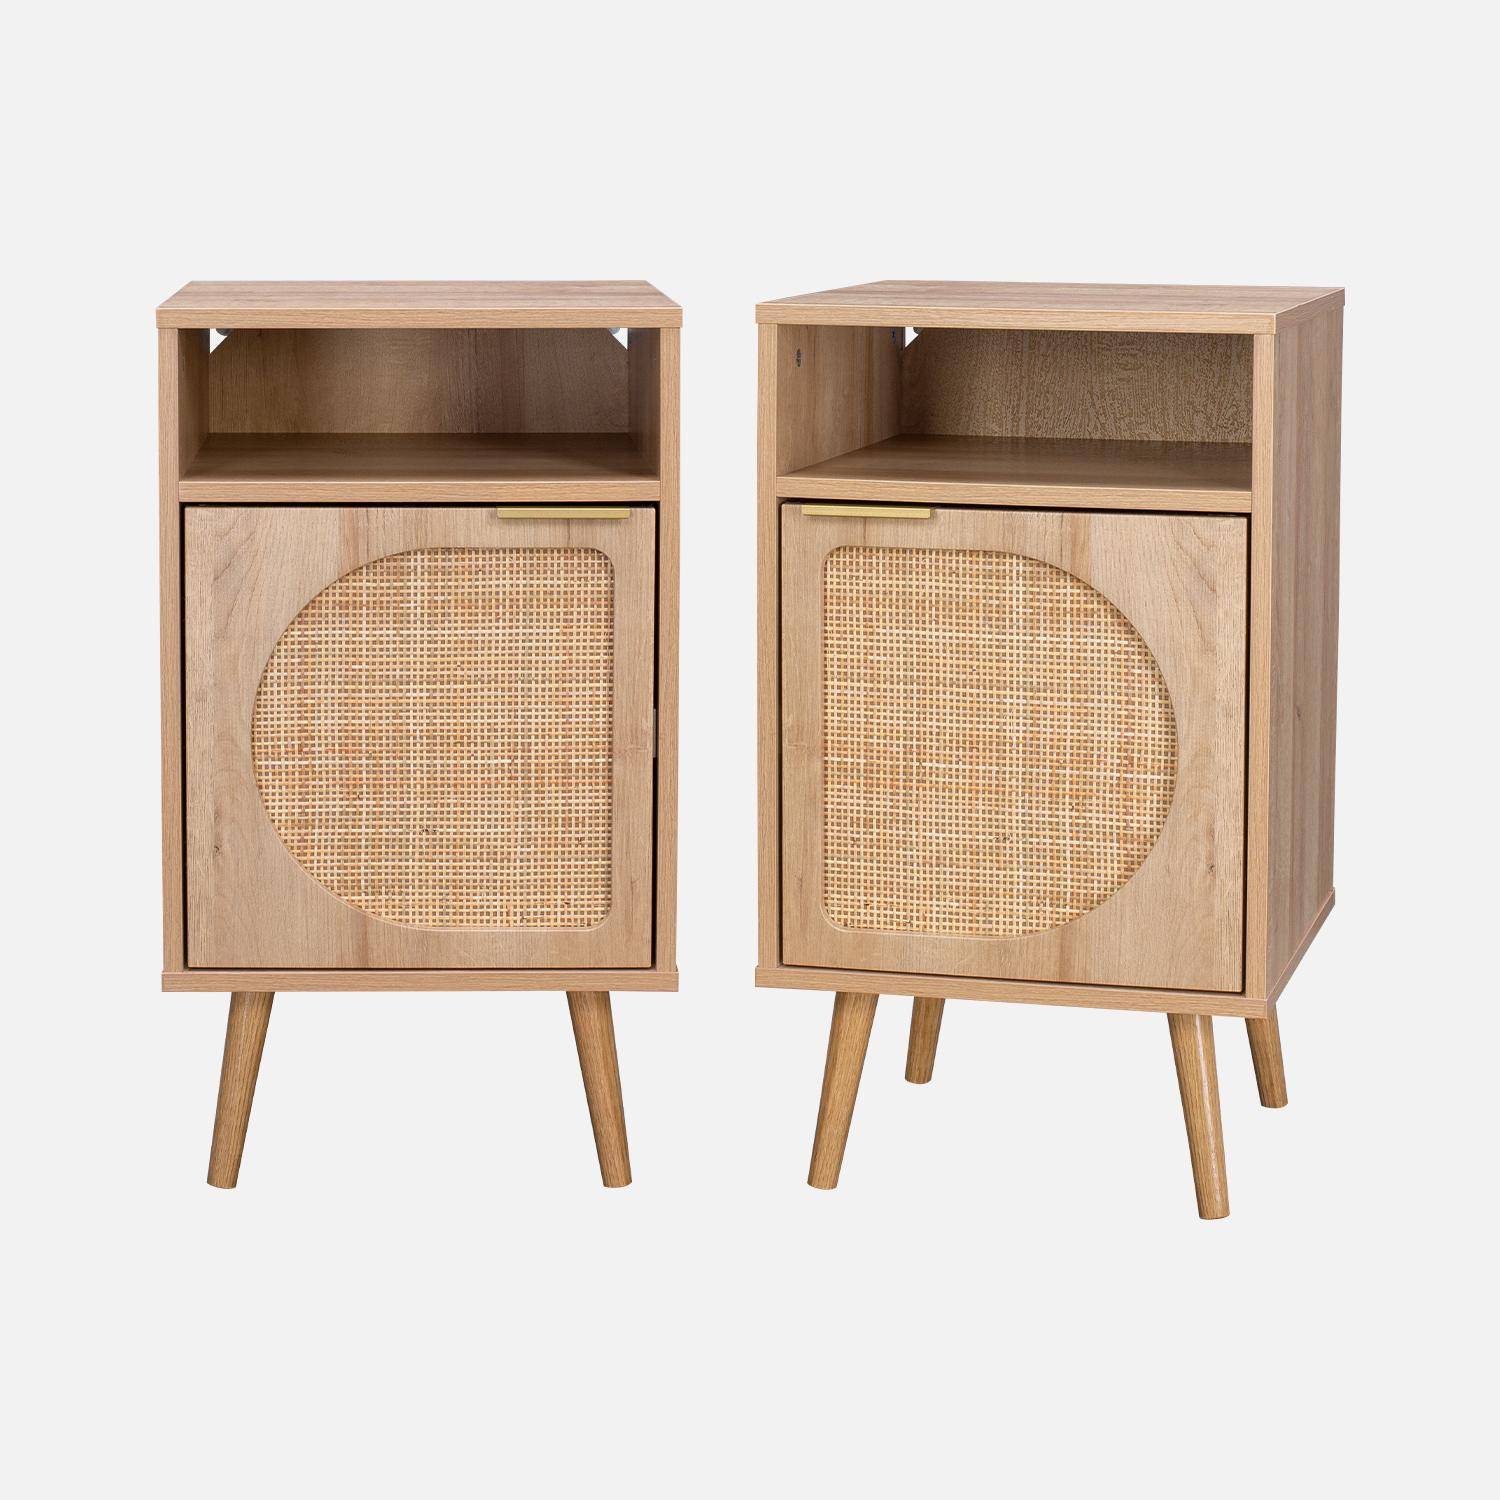 Pair of wood and rounded cane rattan bedside tables, 40x39x65.8cm, Eva, 1 cupboard, 1 storage space each,sweeek,Photo4